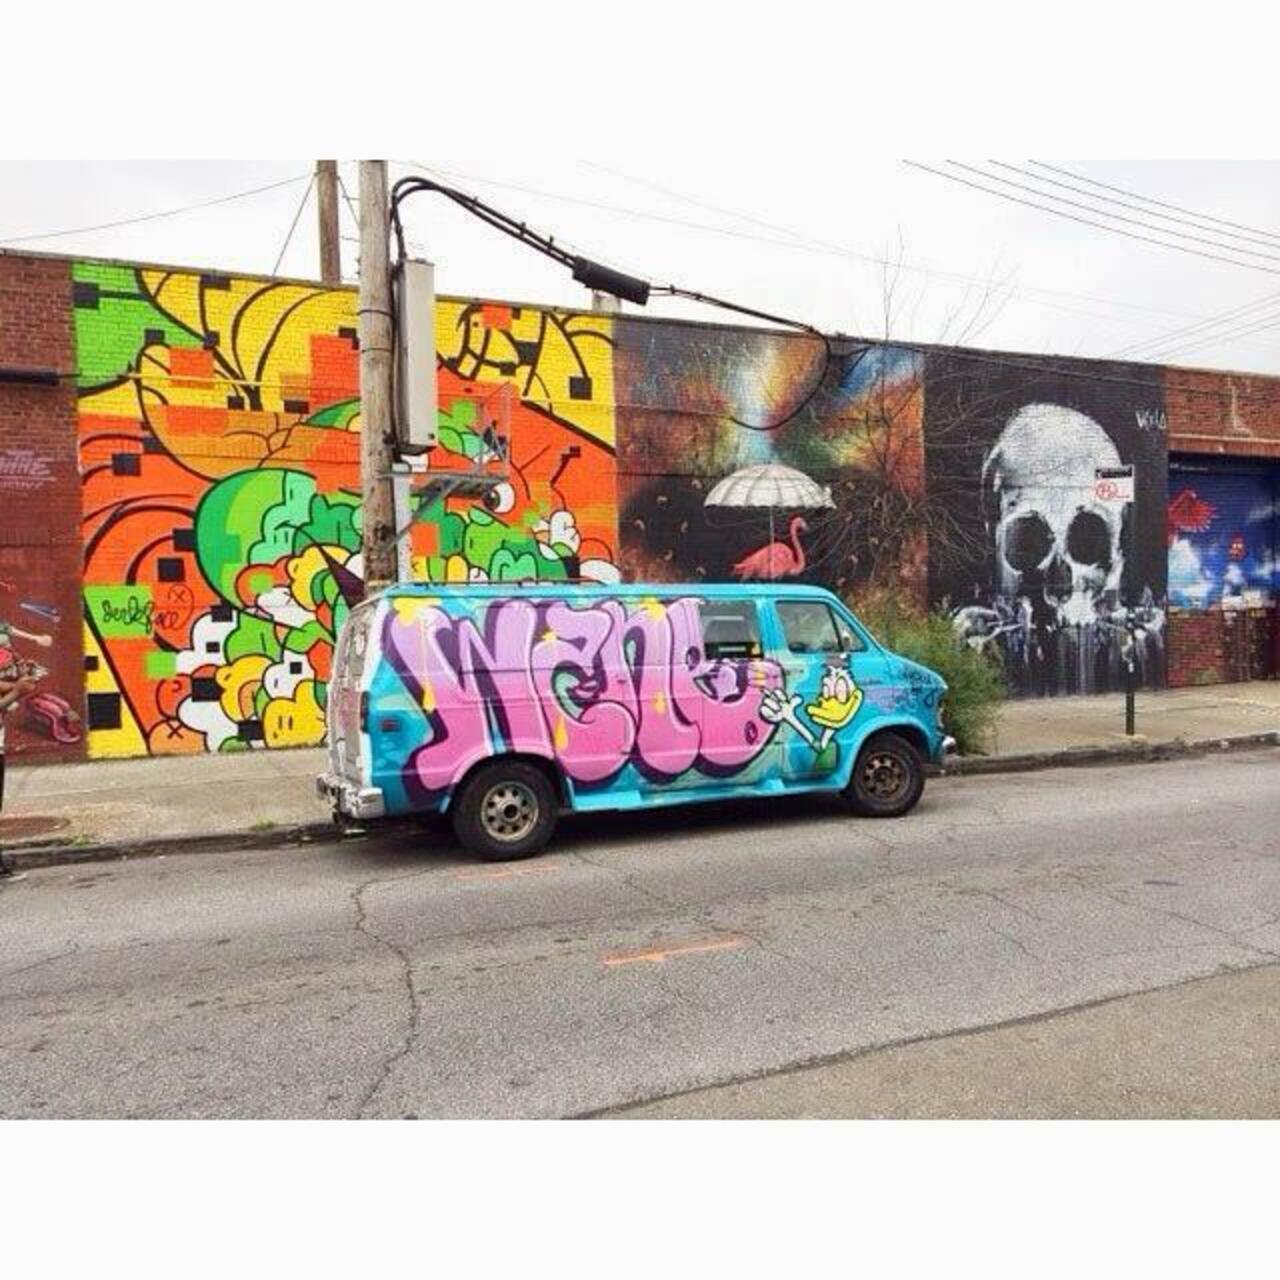 I saw this van in #brooklyn . Does anyone know of the #artist ? #streetart #graffiti http://t.co/n75fCGwzKB